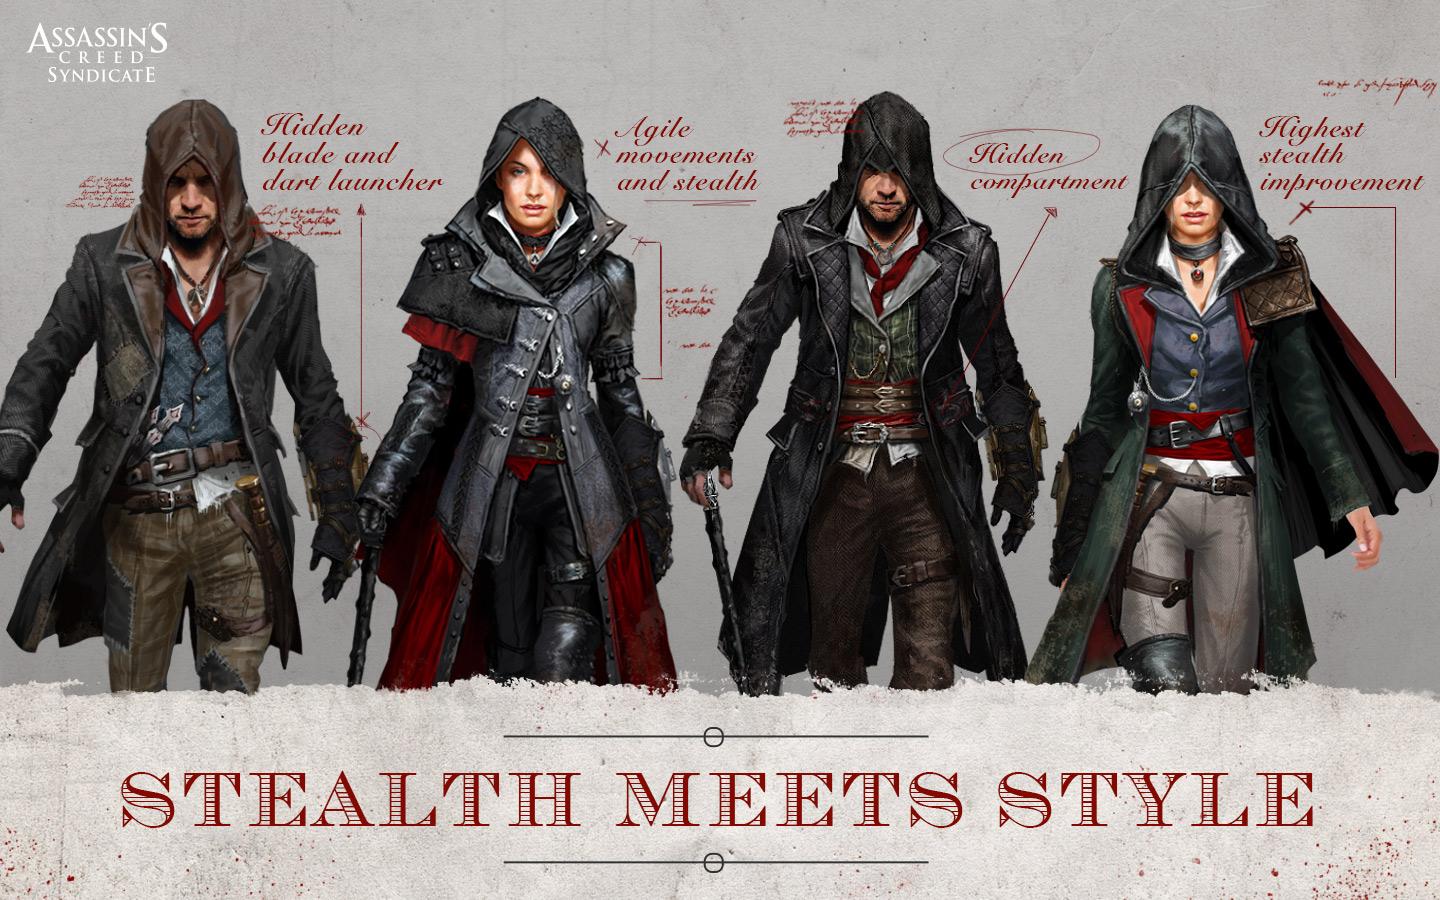 Creed on Twitter: good, feel good. Check out some of the outfits available in Syndicate. http://t.co/g6XwQ47uva" / Twitter